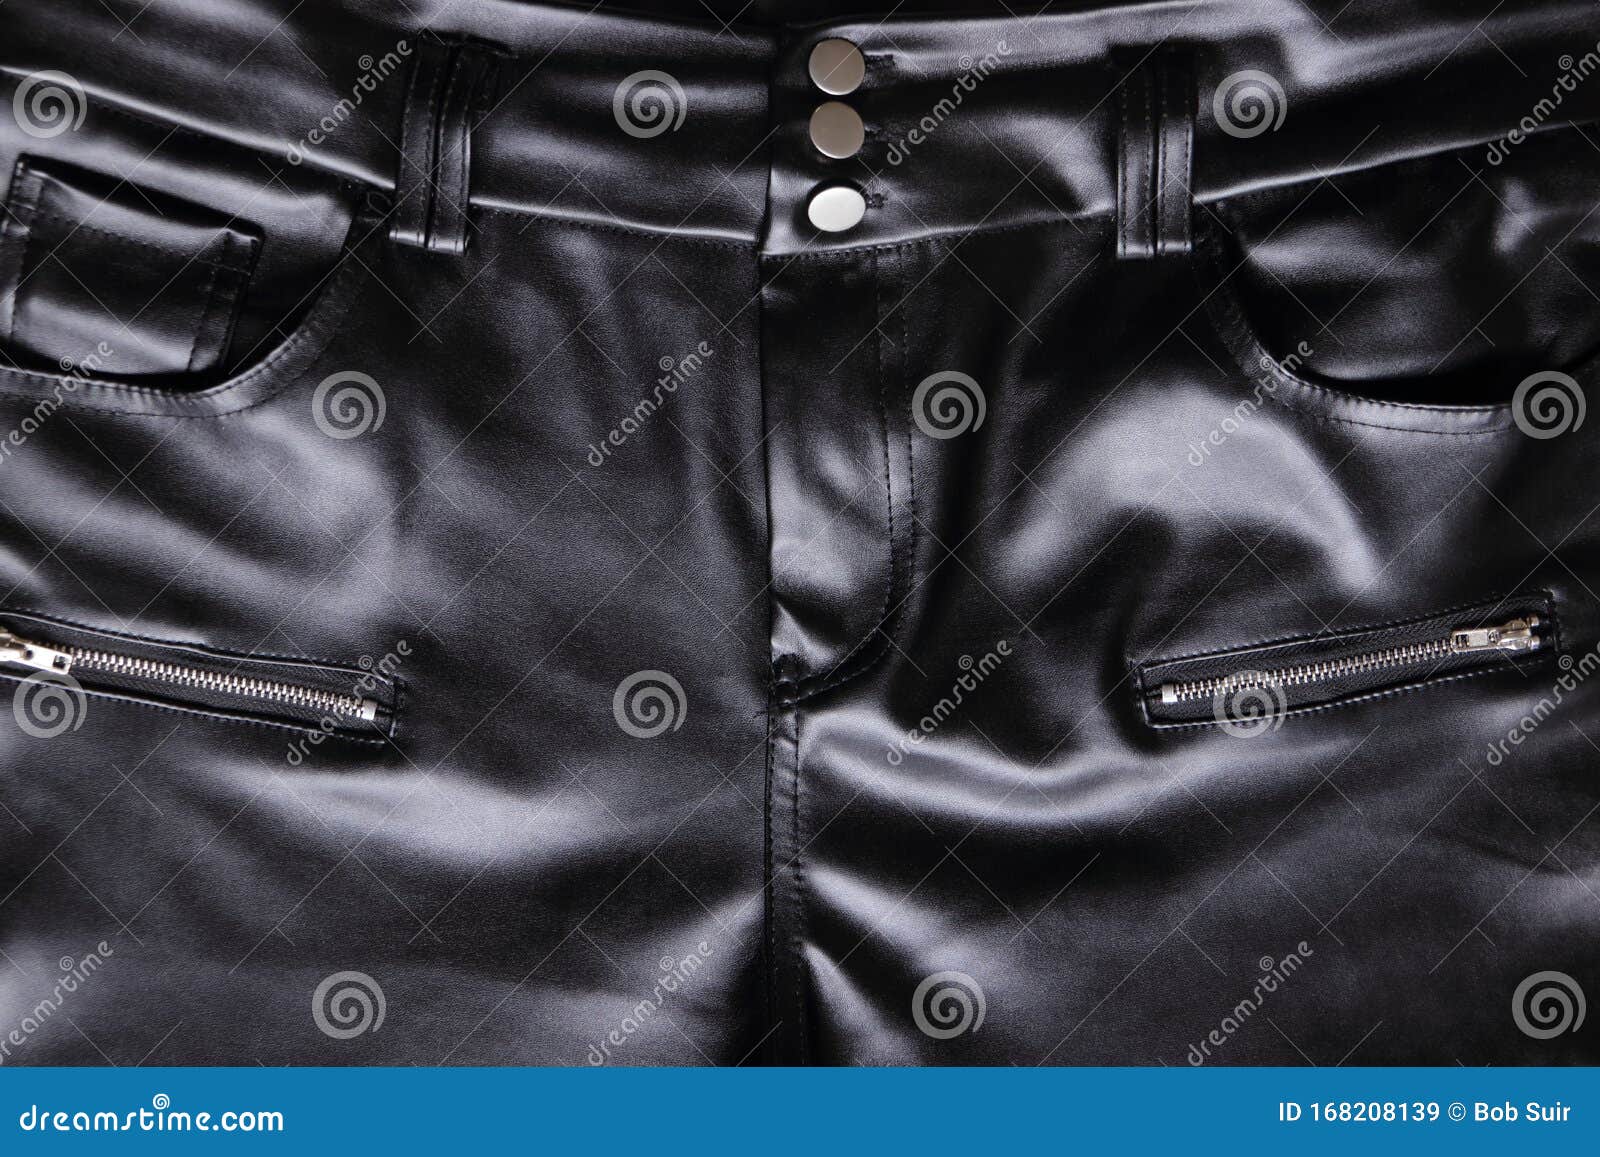 Shiny Black Fake Leather Trousers with Silver Buttons Stock Image